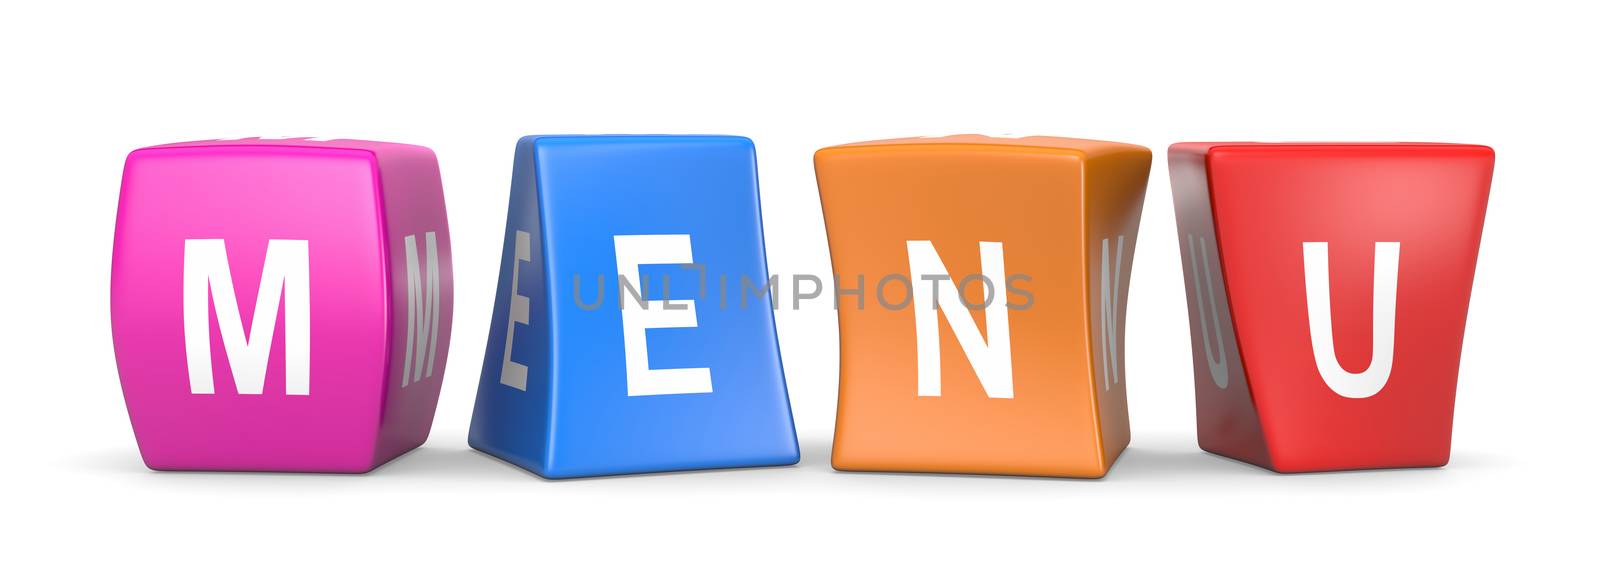 Menu White Text on Colorful Deformed Funny Cubes 3D Illustration on White Background